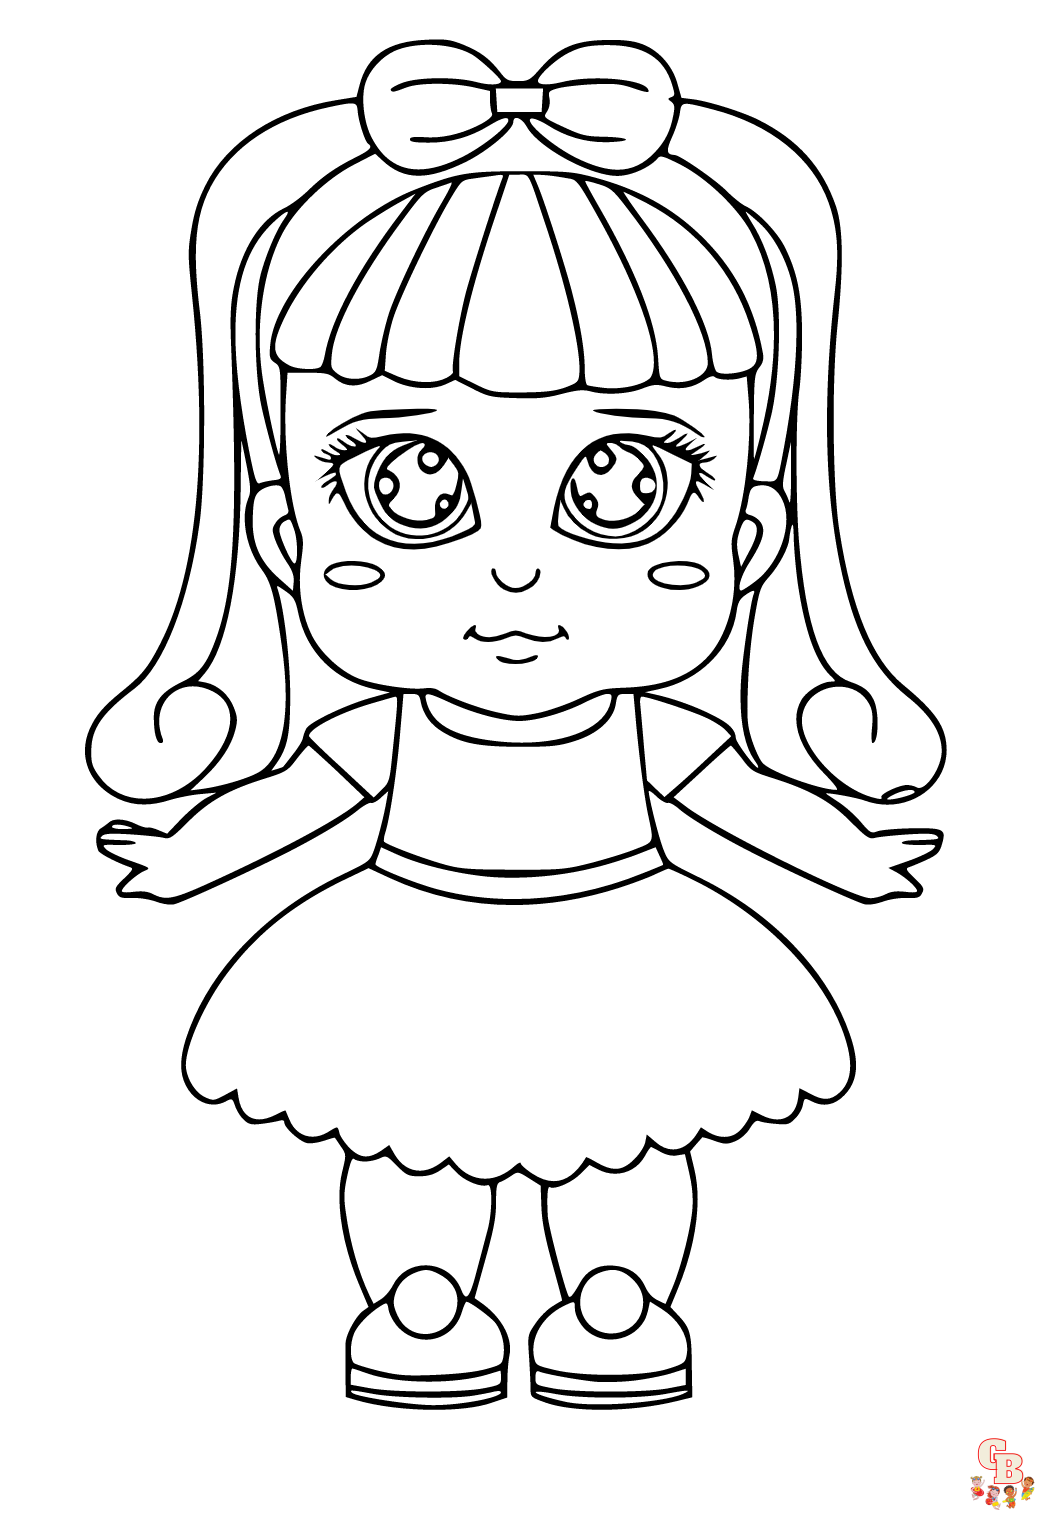 Free Cute Baby Alive Doll coloring pages for kids 2